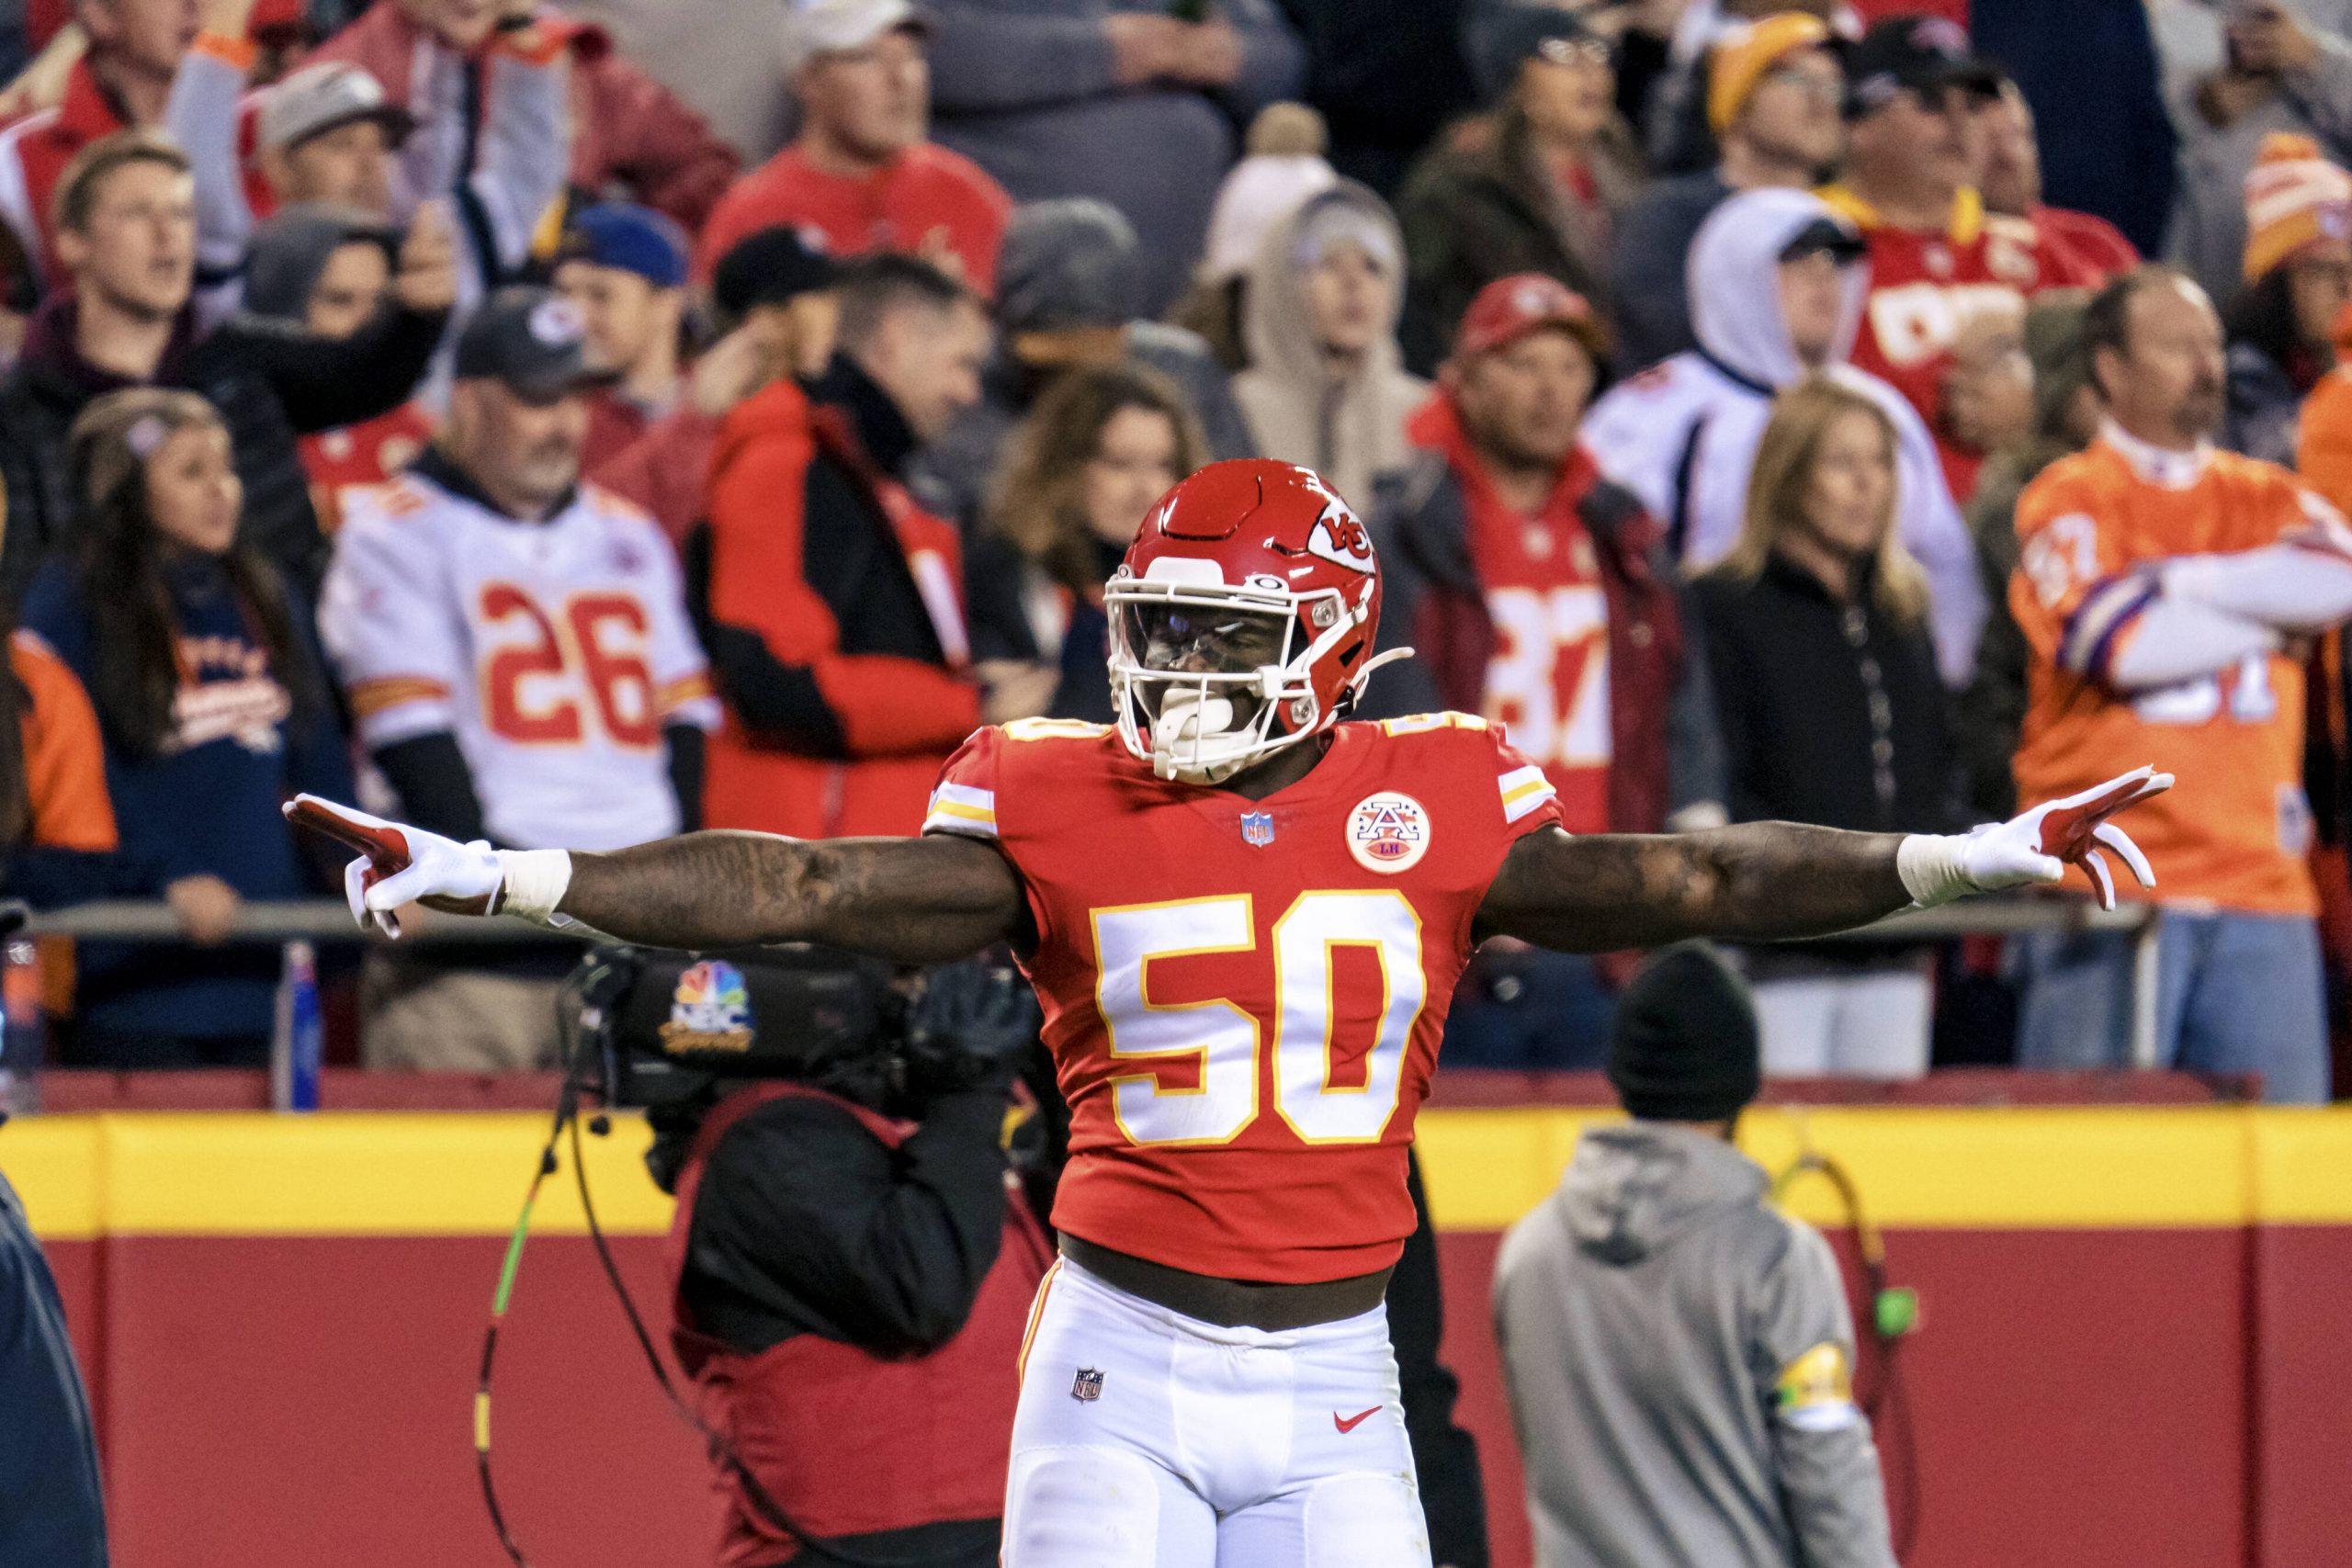 Kansas City Chiefs middle linebacker Willie Gay Jr. (50) celebrates after a successful third down play against the Denve